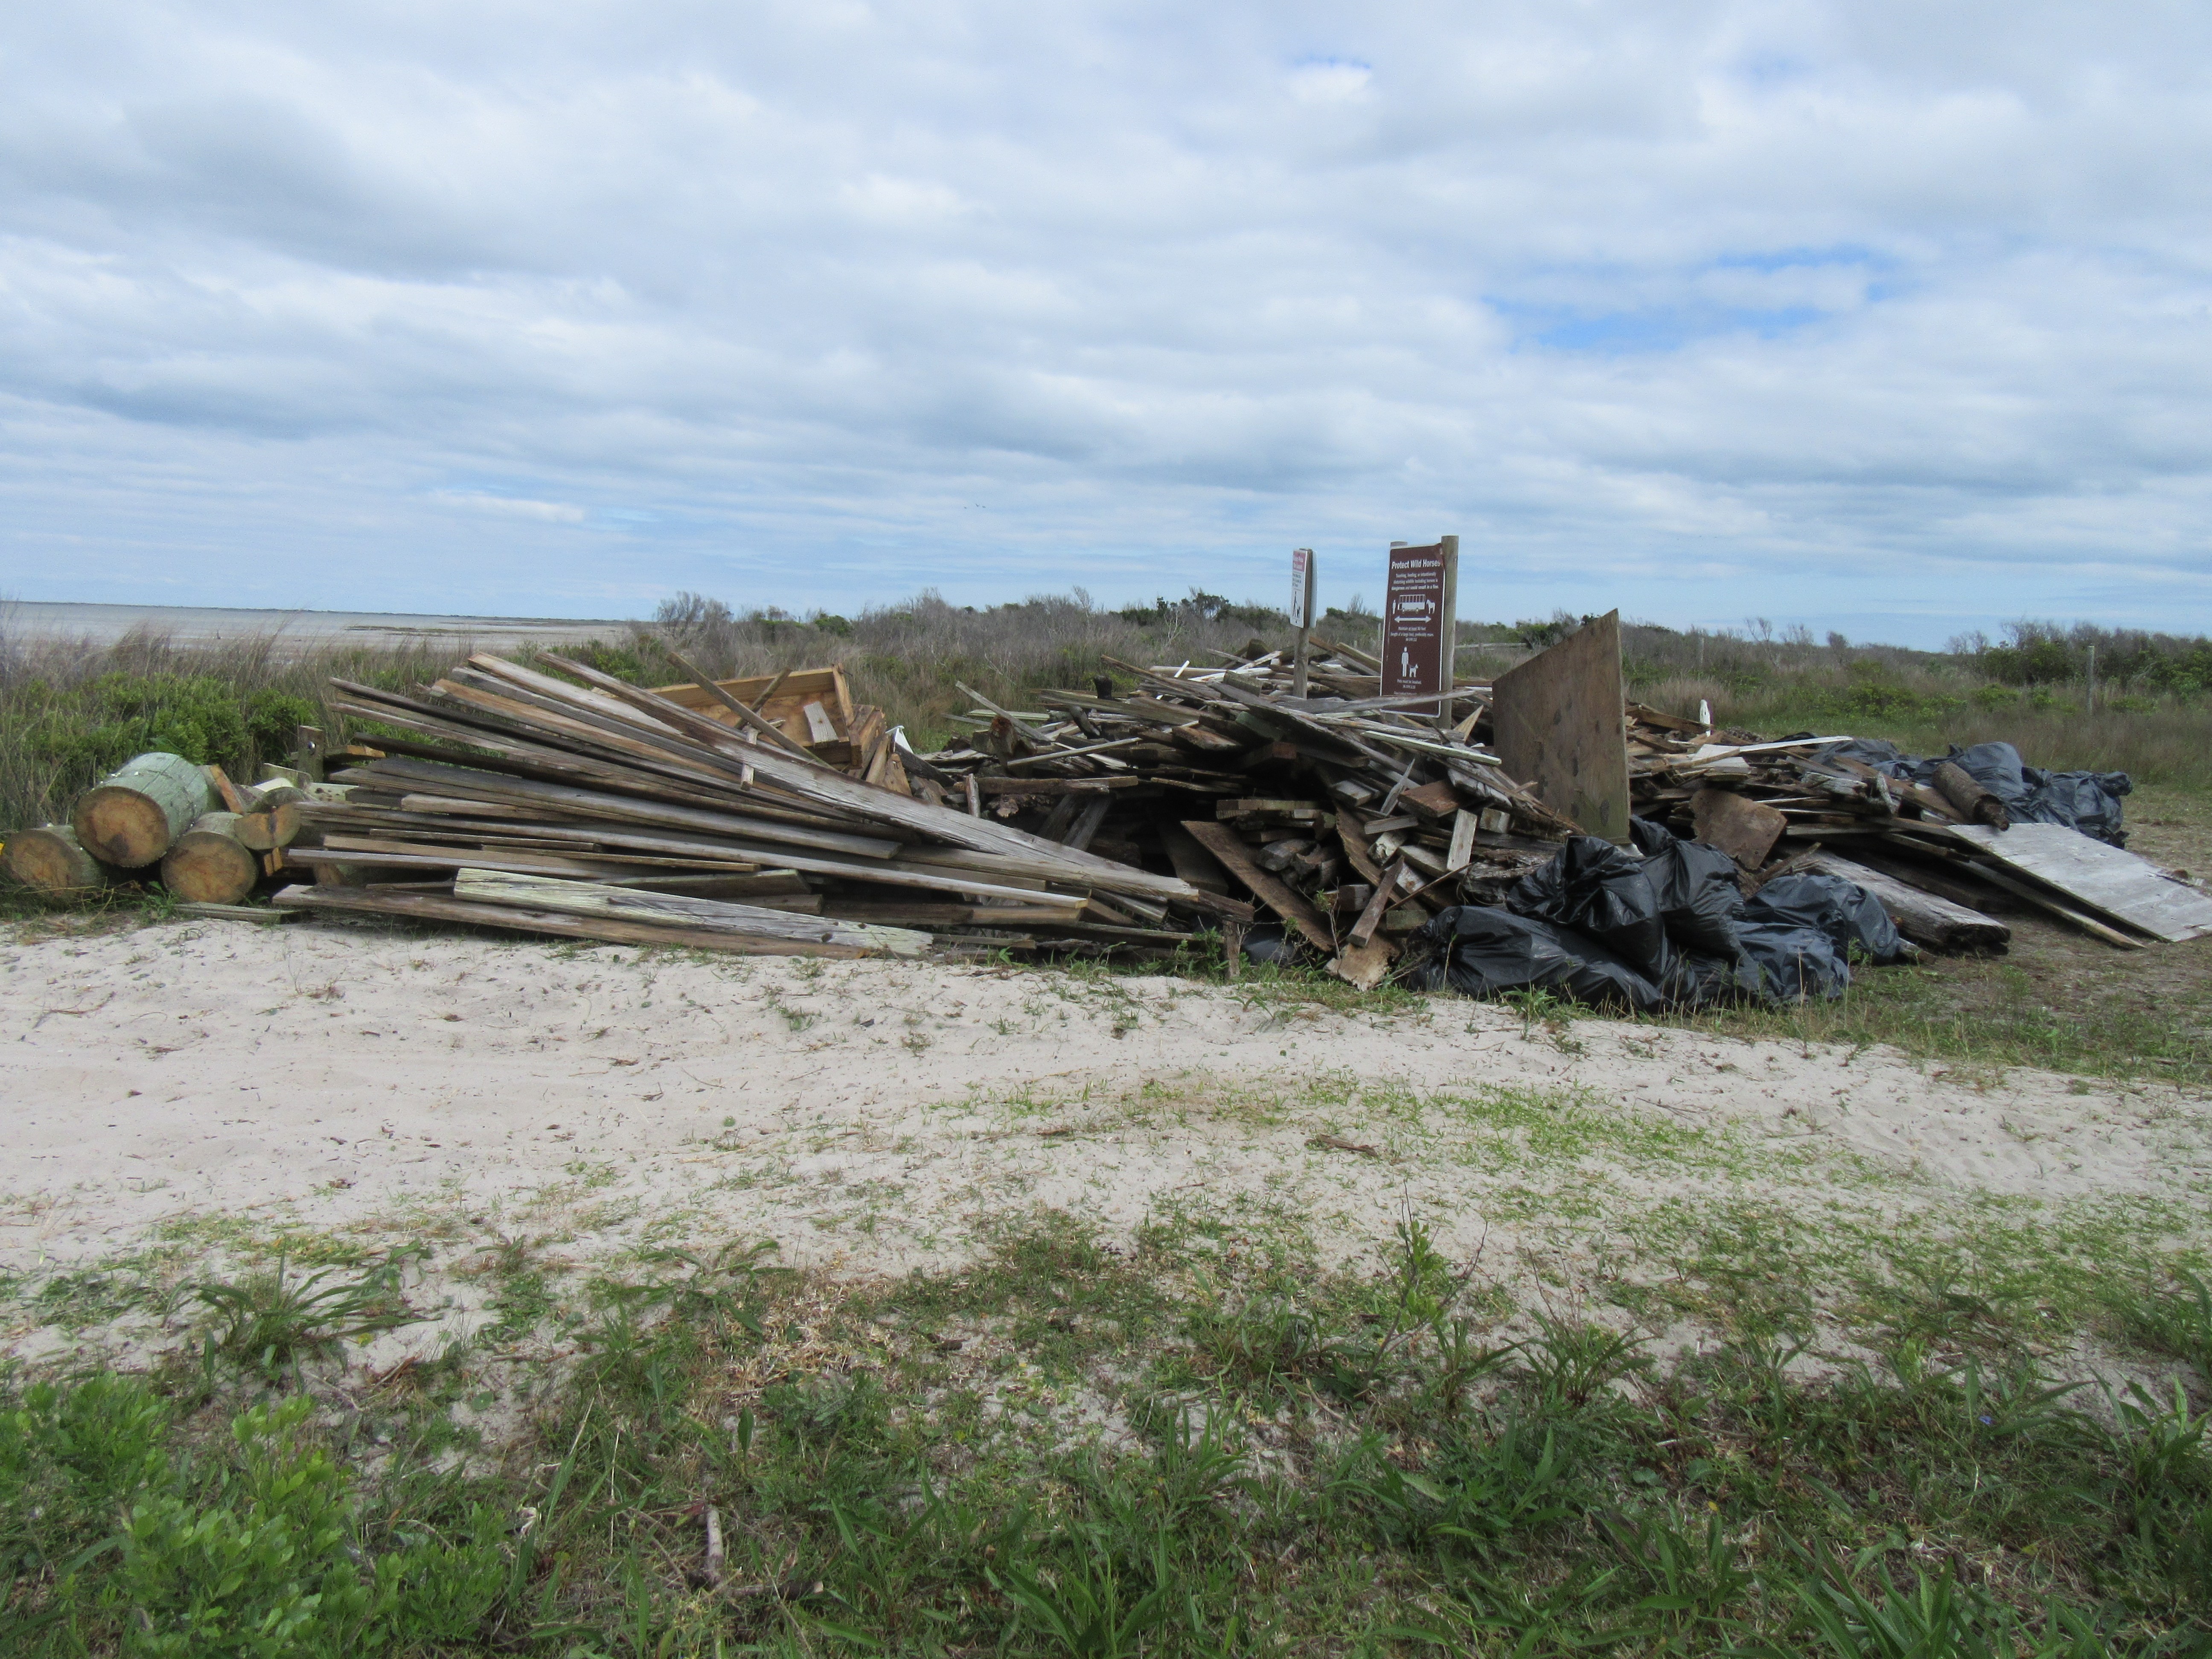 large pile of boards and other debris